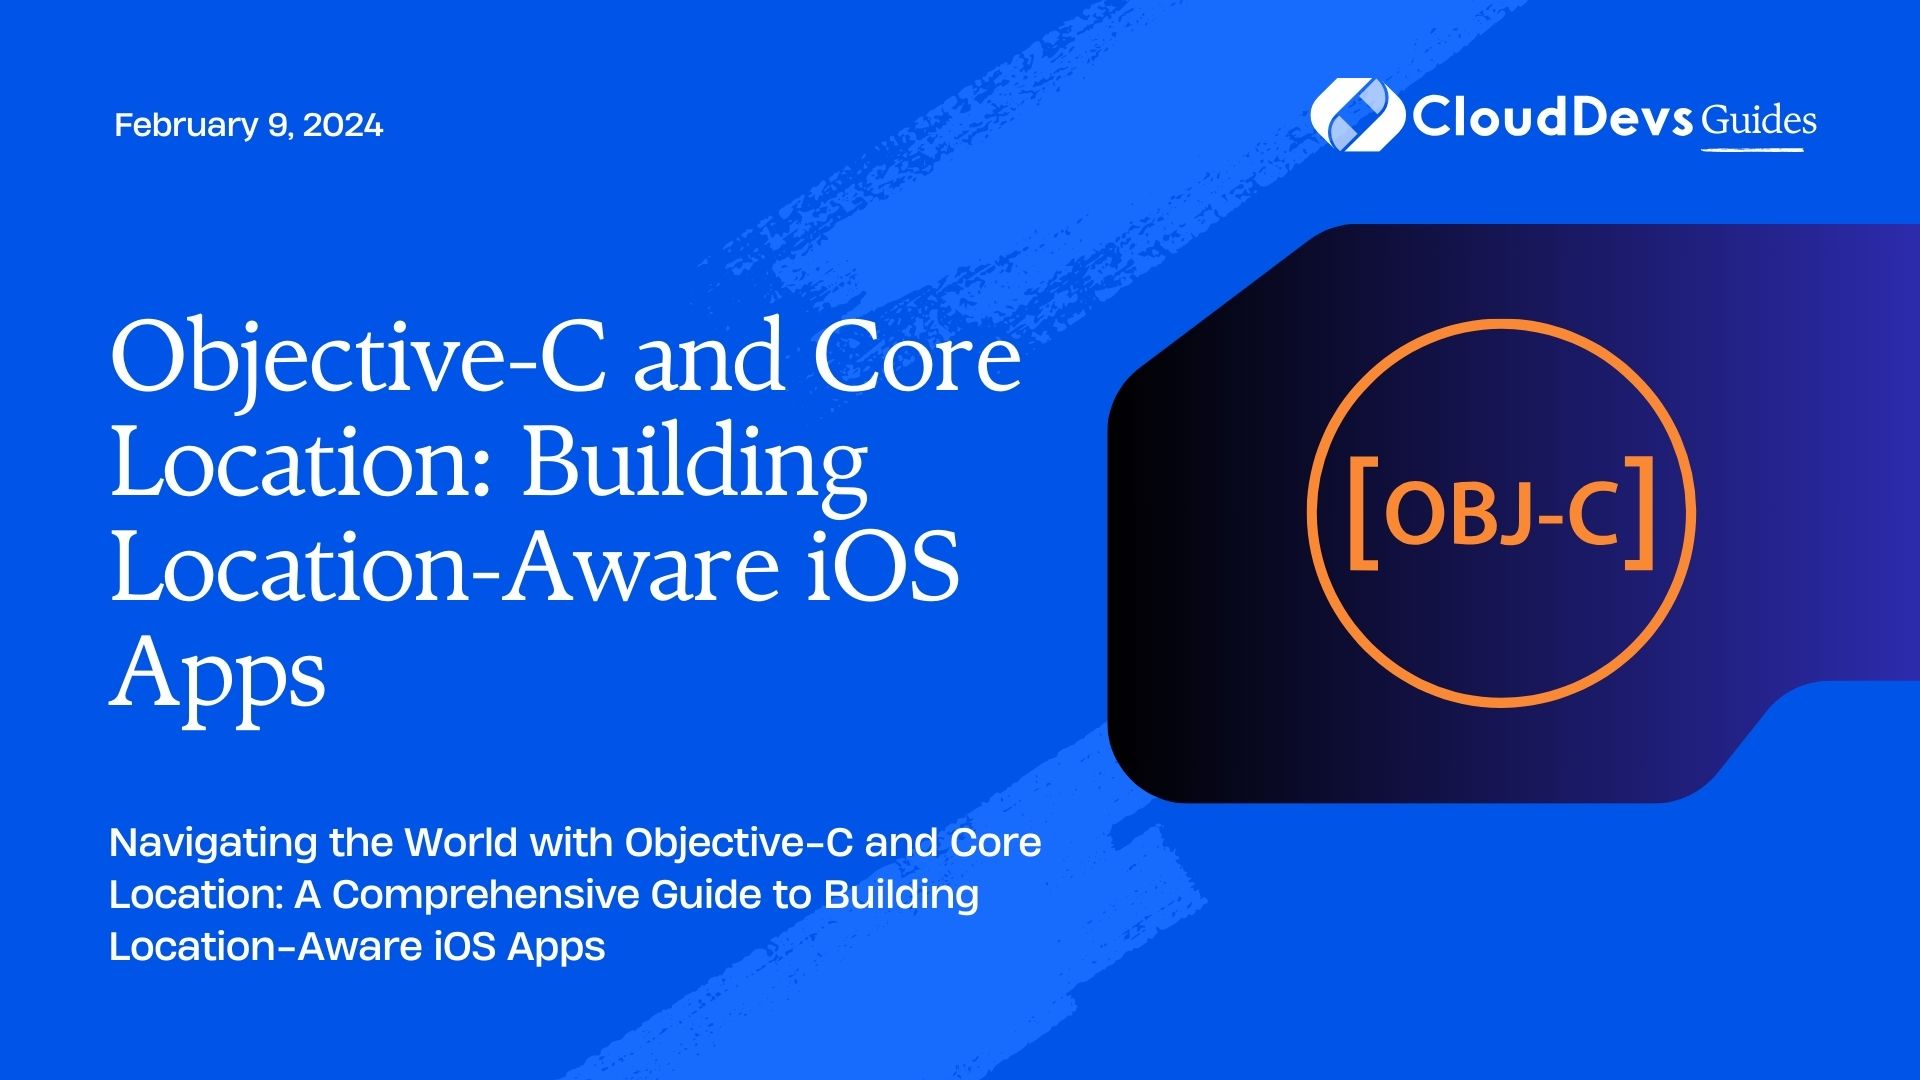 Objective-C and Core Location: Building Location-Aware iOS Apps